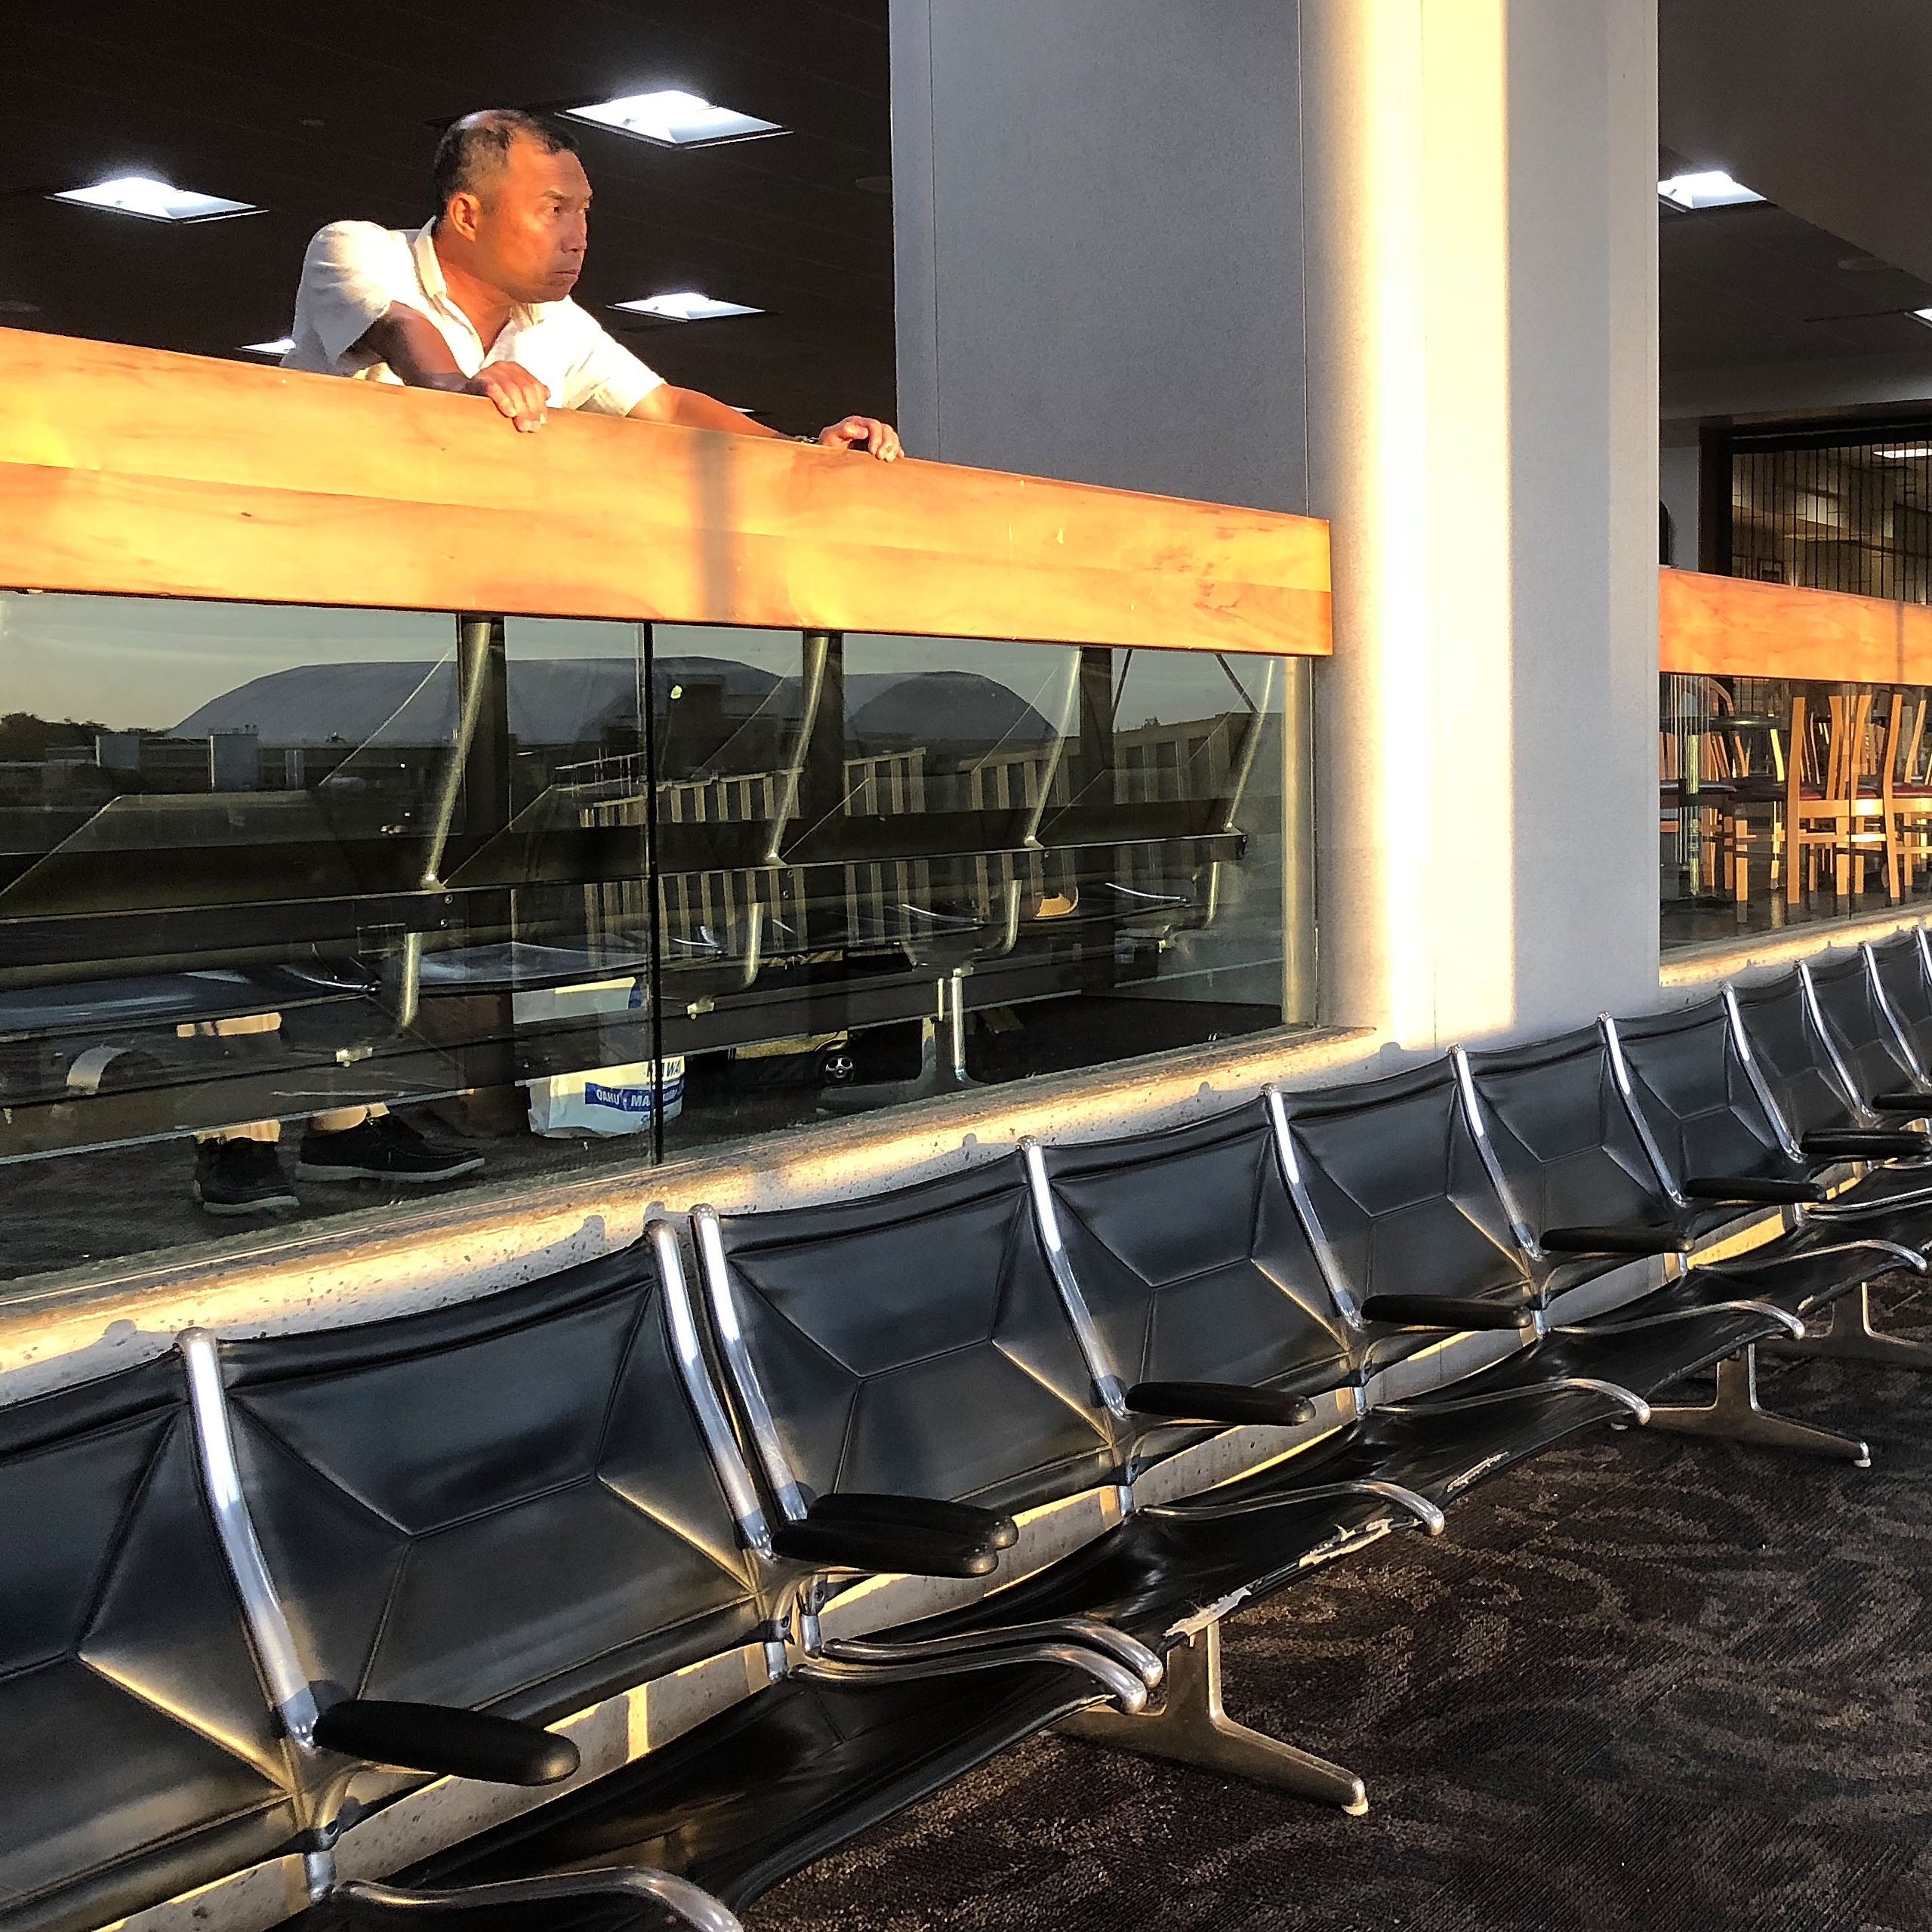 A lounge at Honolulu's Daniel K. Inouye International Airport sits mostly empty as Hurricane Lane approaches the island chain on August 22, 2018 .